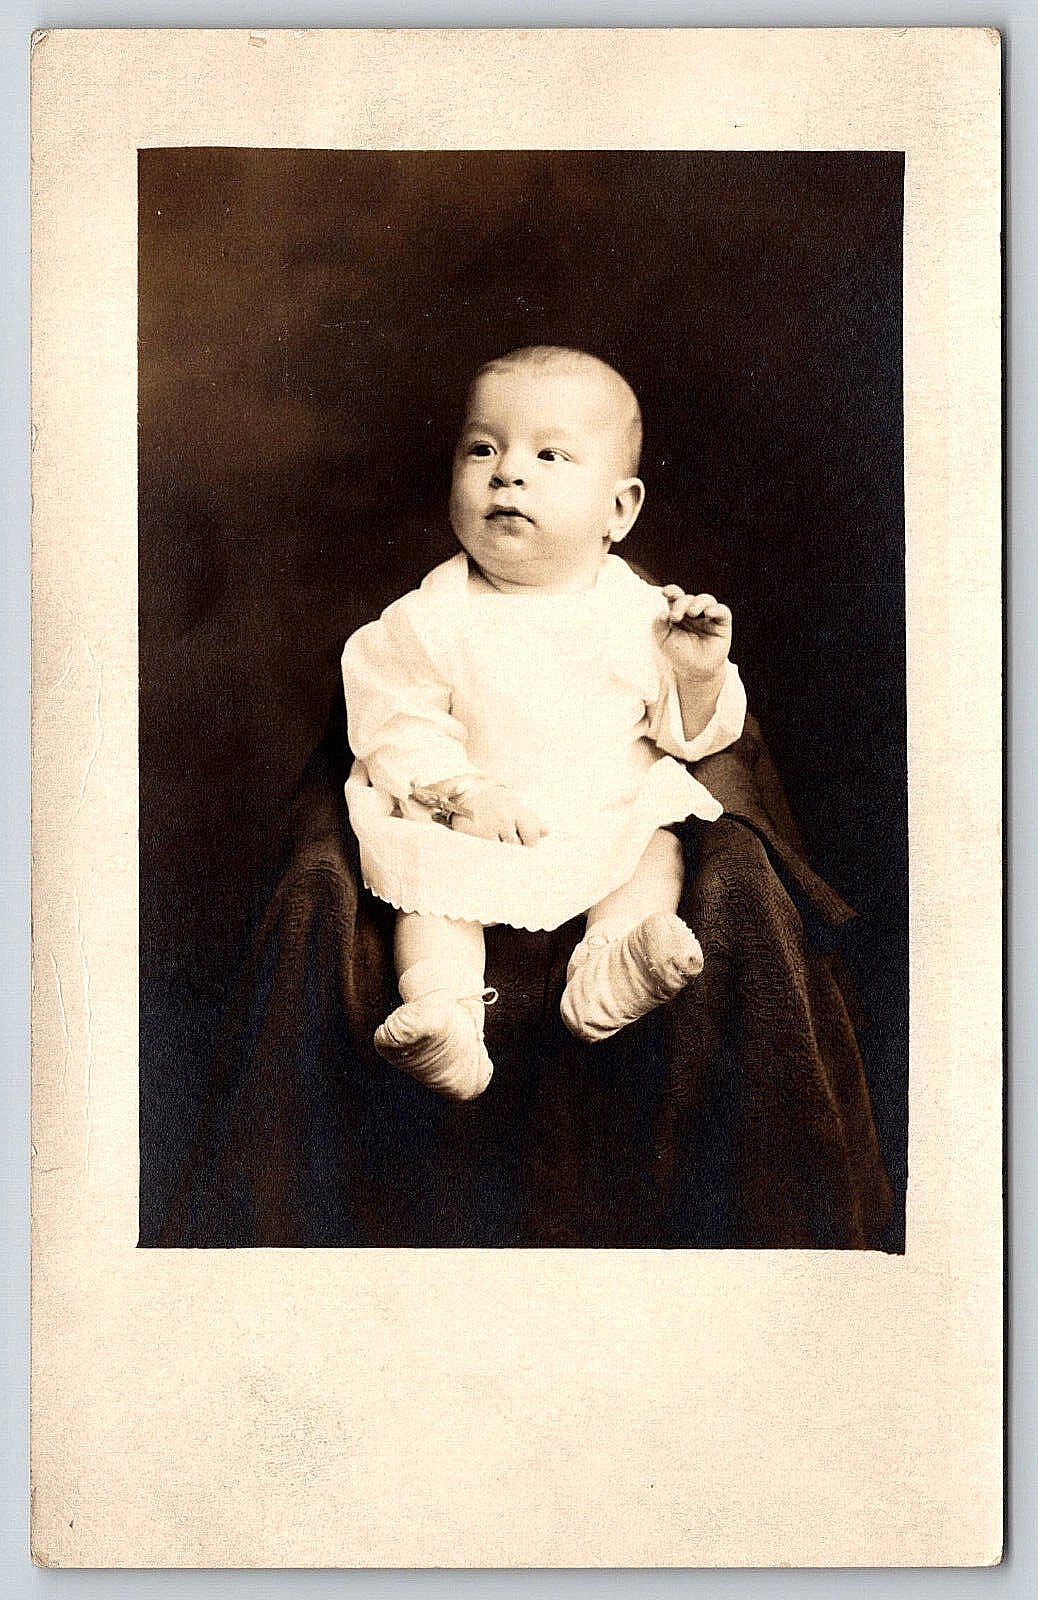 Postcard RPPC Portrait Of Infant Baby In White Dress Sepia Real Photo Unposted